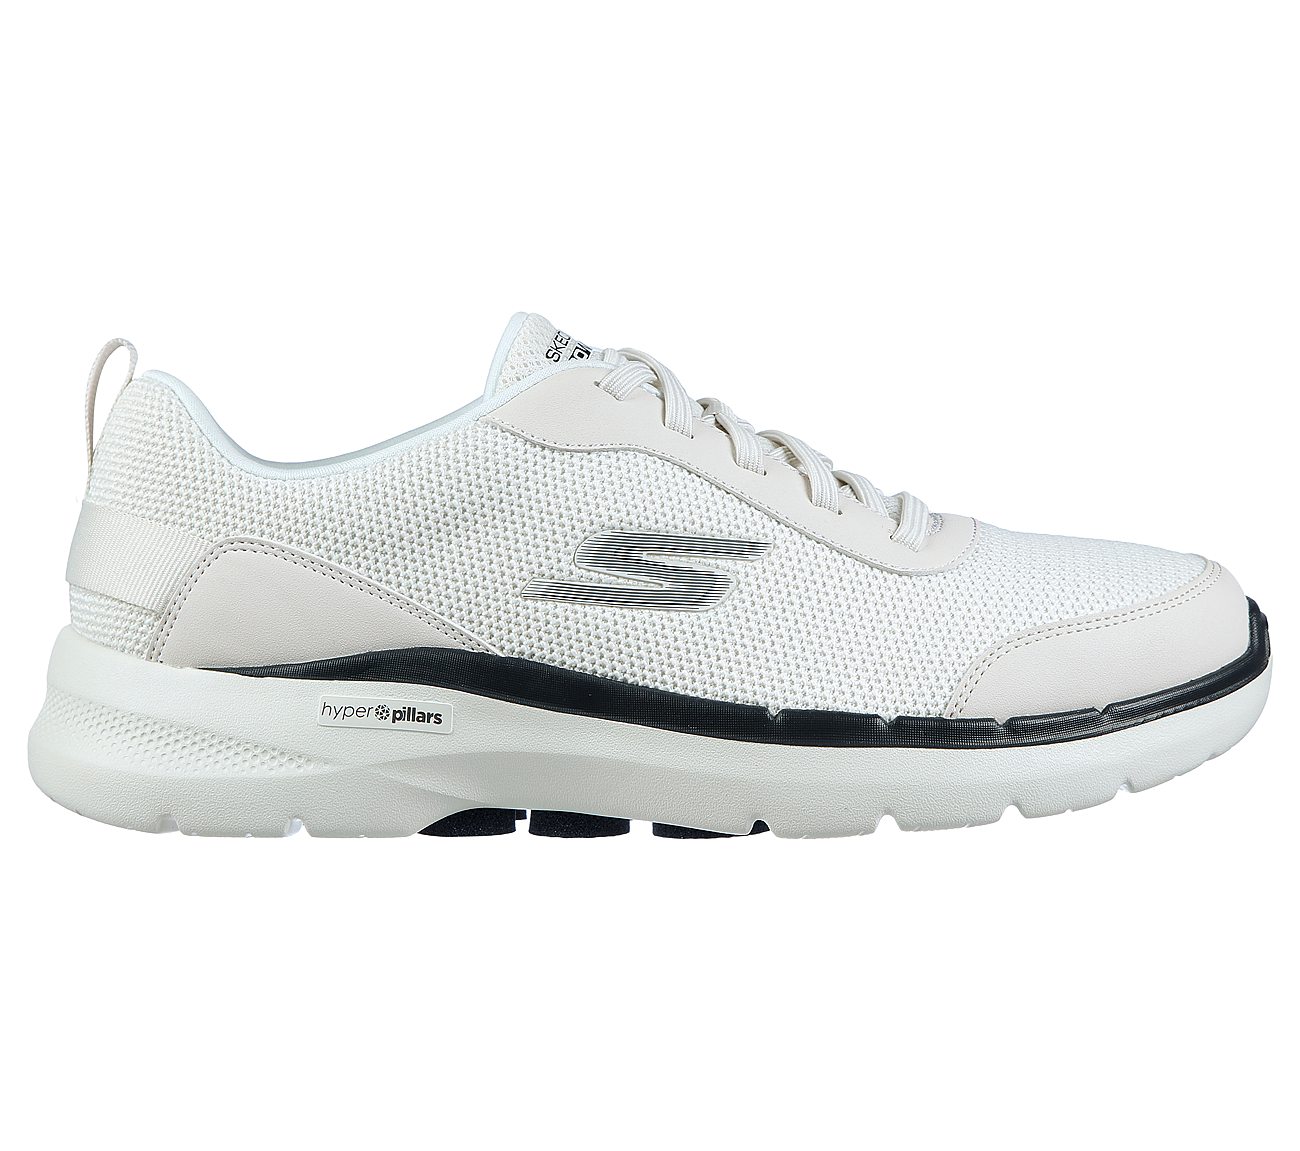 Skechers White/Navy Go Walk 6 Bold-Knight Mens Lace Up Shoes - Style ID ...